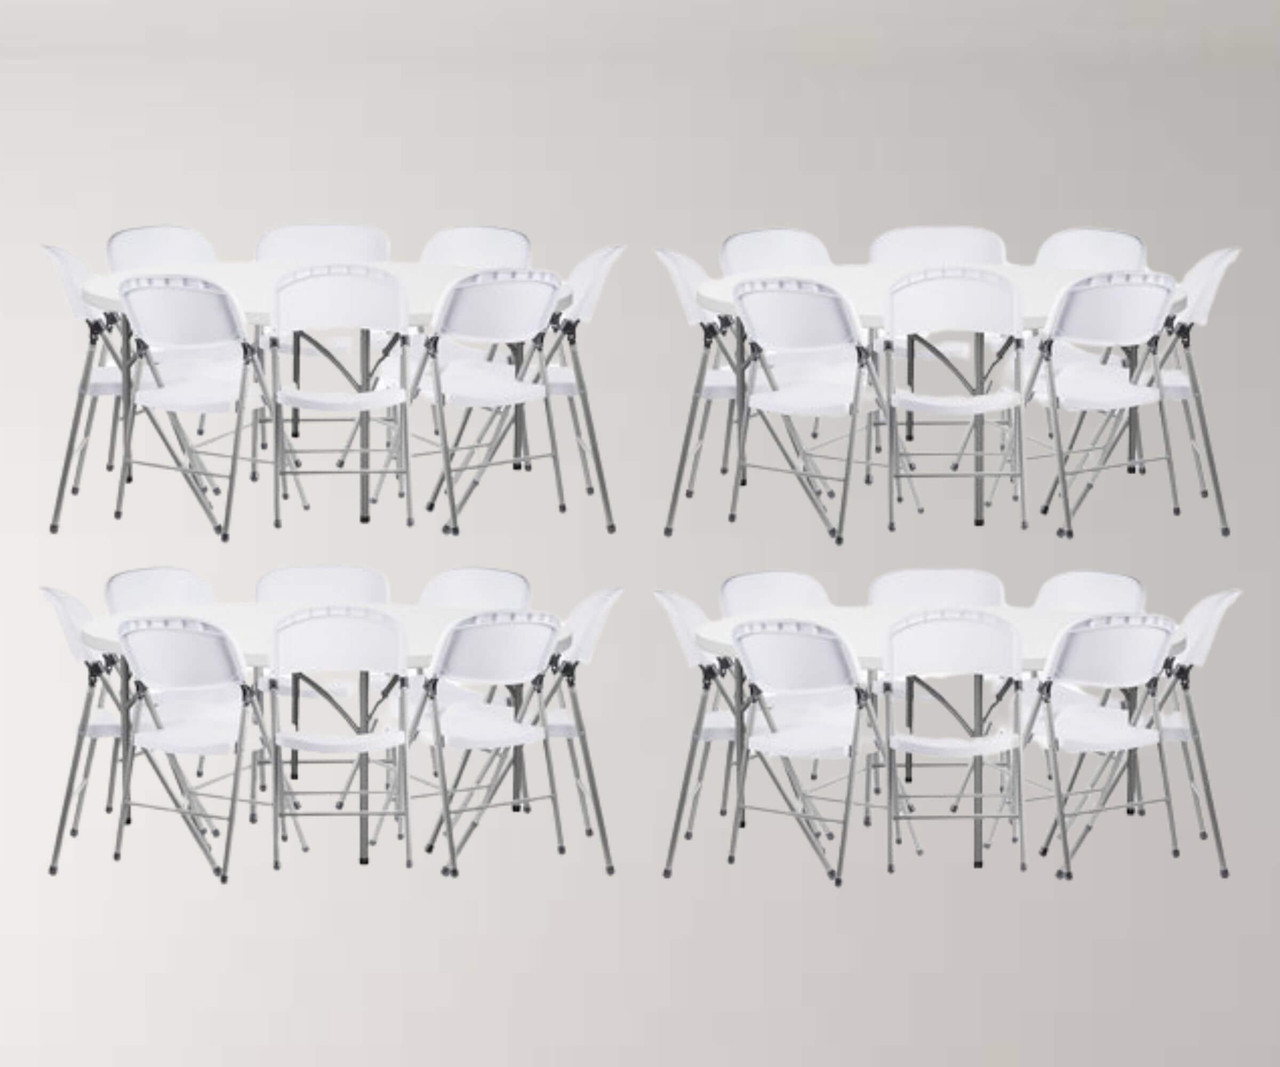 CP Round Granite White Heavy-Duty Blow Molded Plastic Folding Tables with 32 White Folding Chairs (4) 72"| Complete Seating Ensemble for Grand Events- Chicken Pieces